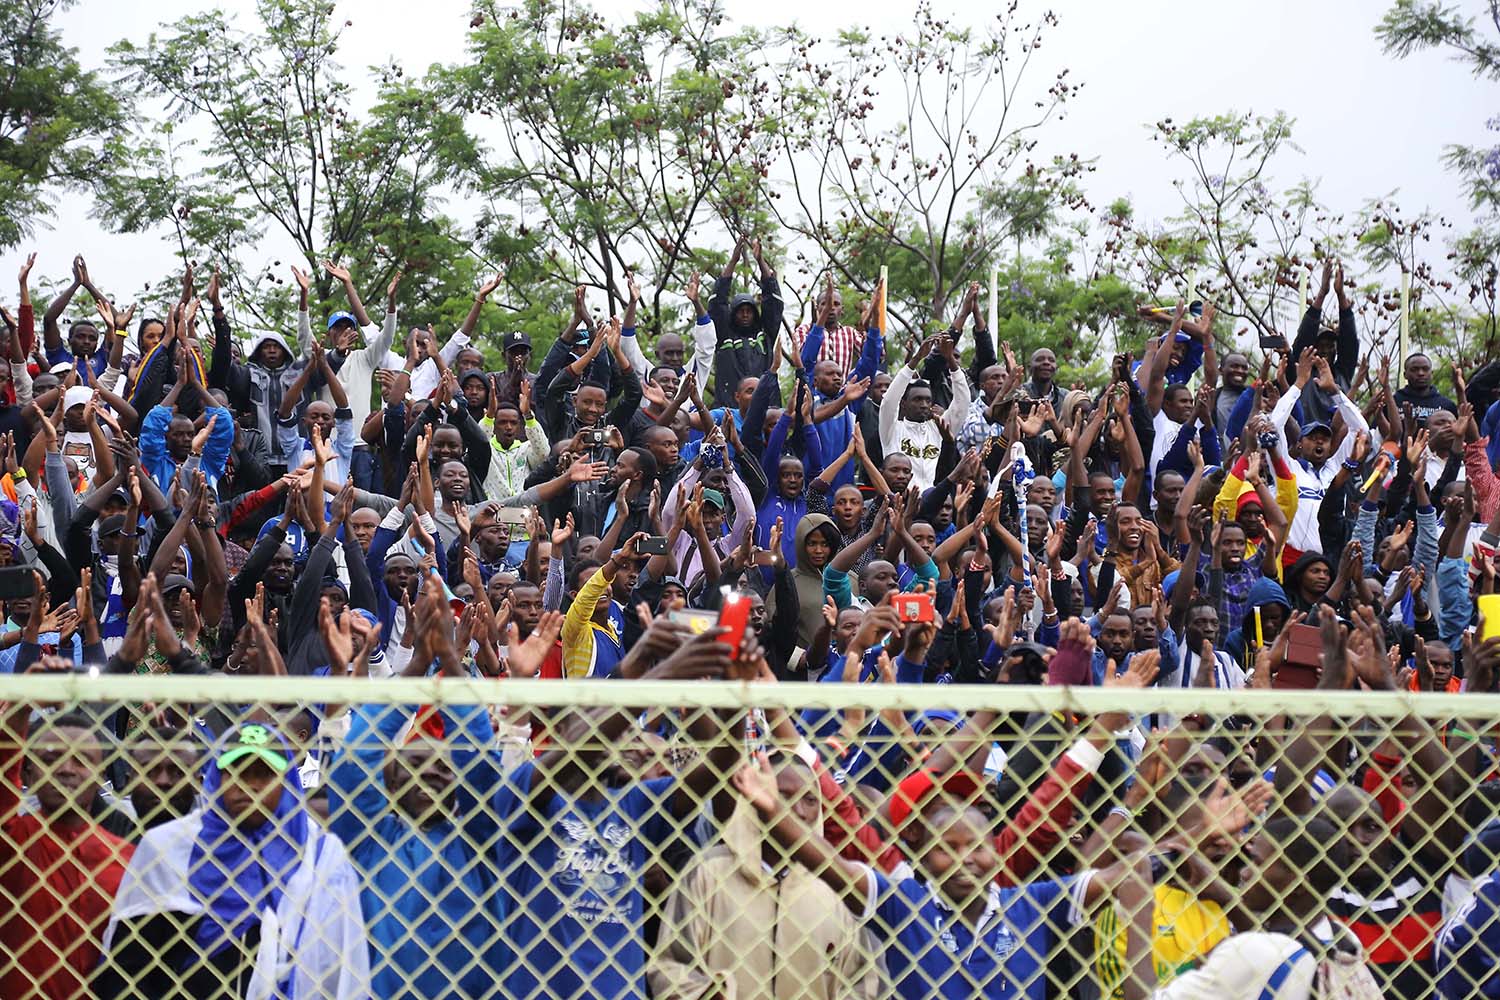 Supporters cheer on their players after qualifying their side